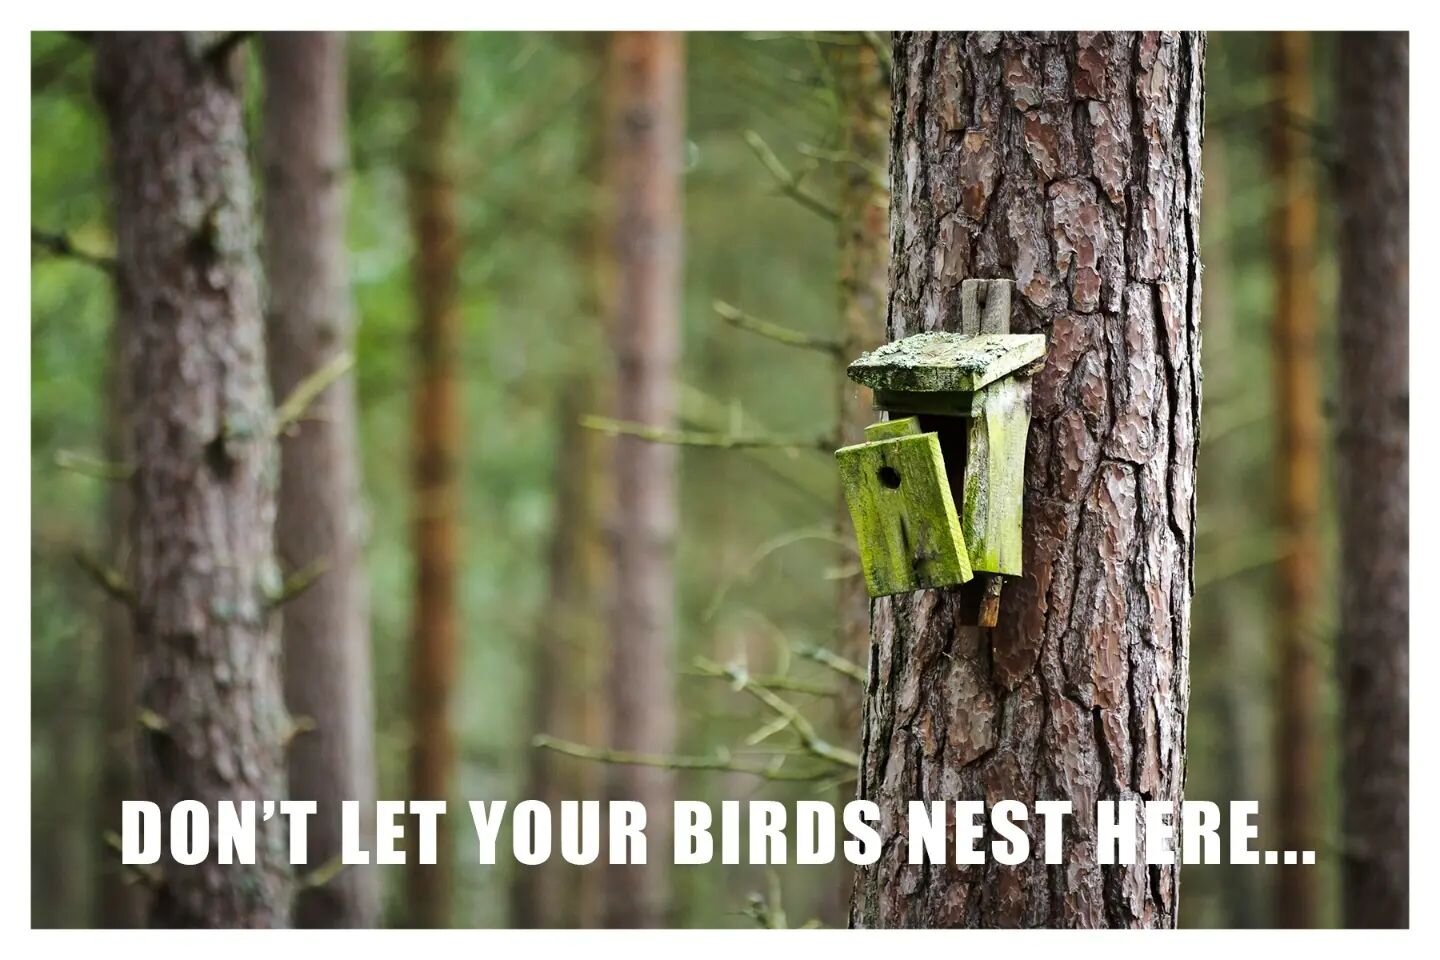 Spring 🌼🌱 is right around the corner. Be ready to nurture your beautiful birds when they're ready to nest!
.
.
.
.
.
#chirp #chirpbirdhouses #birdhouse #birdhouses #birdhousekit #birdhousekits #birdhouseart #birdhouselove #birdhousedesign #birding 